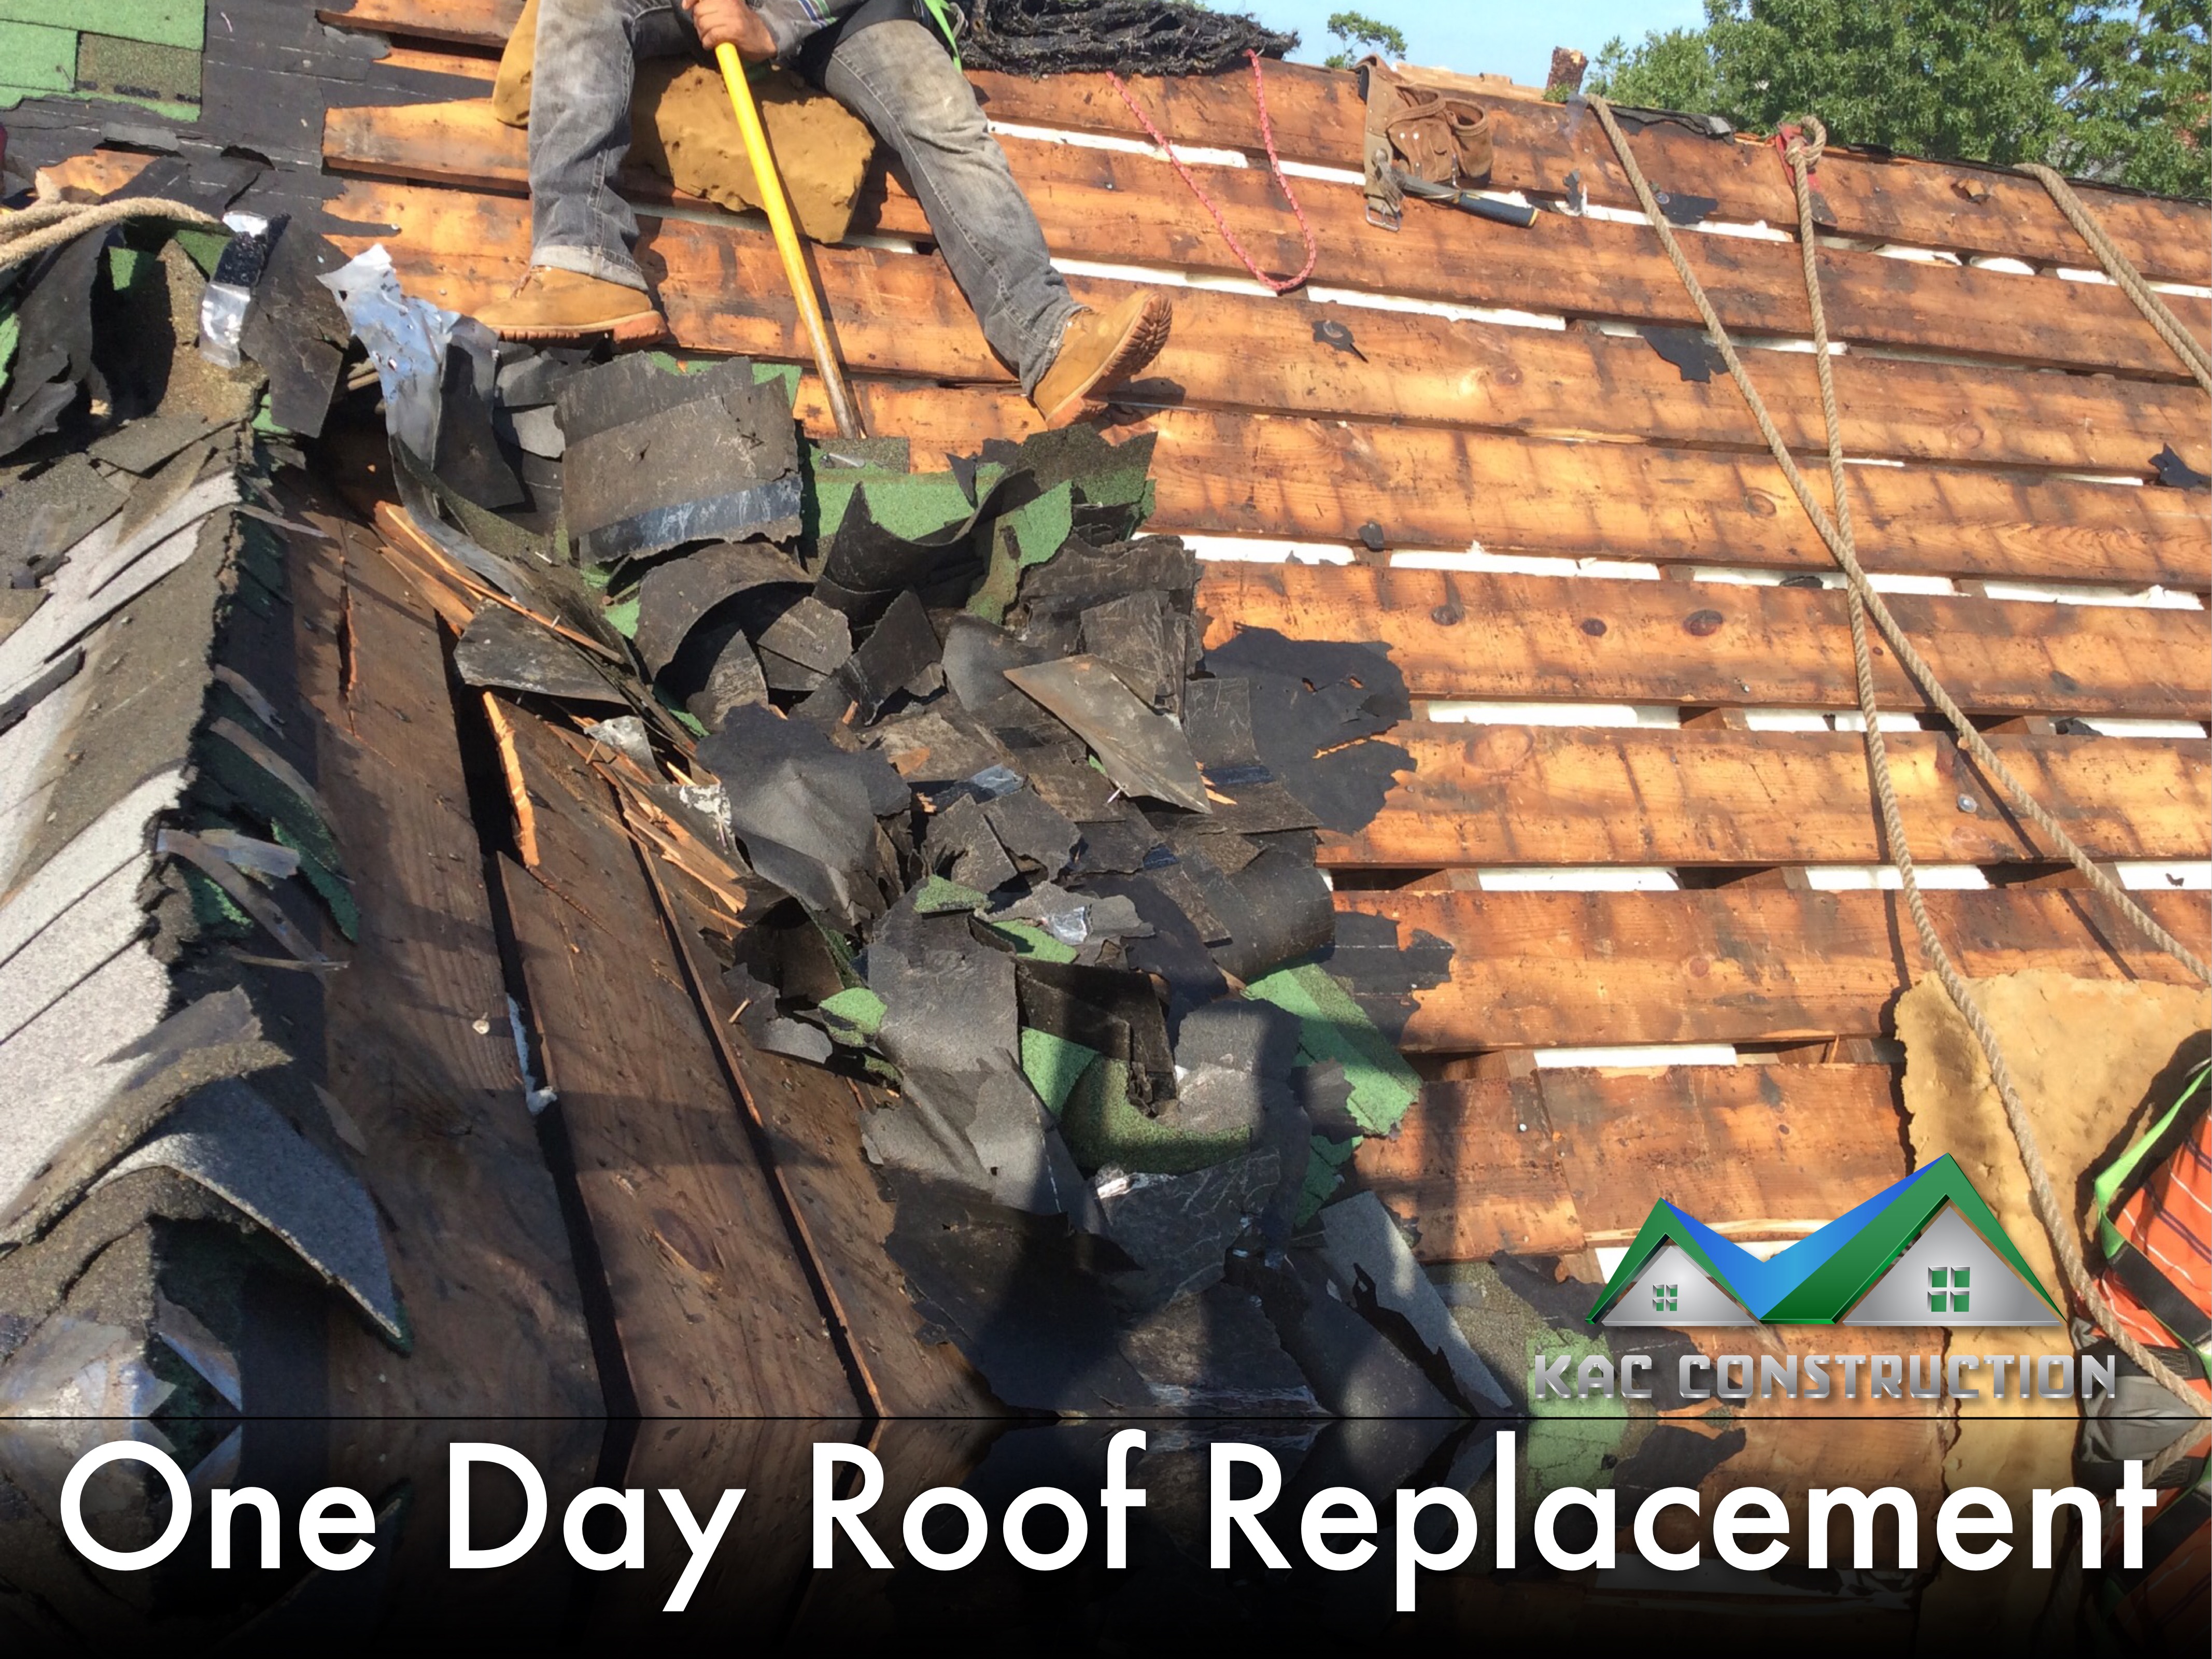 roof replacement contractor, roof replacement contractor ri, roof replacement in ri, roof replacement contractor in ri, ri roof replacement, roofing ri, roofer ri, roofers ri